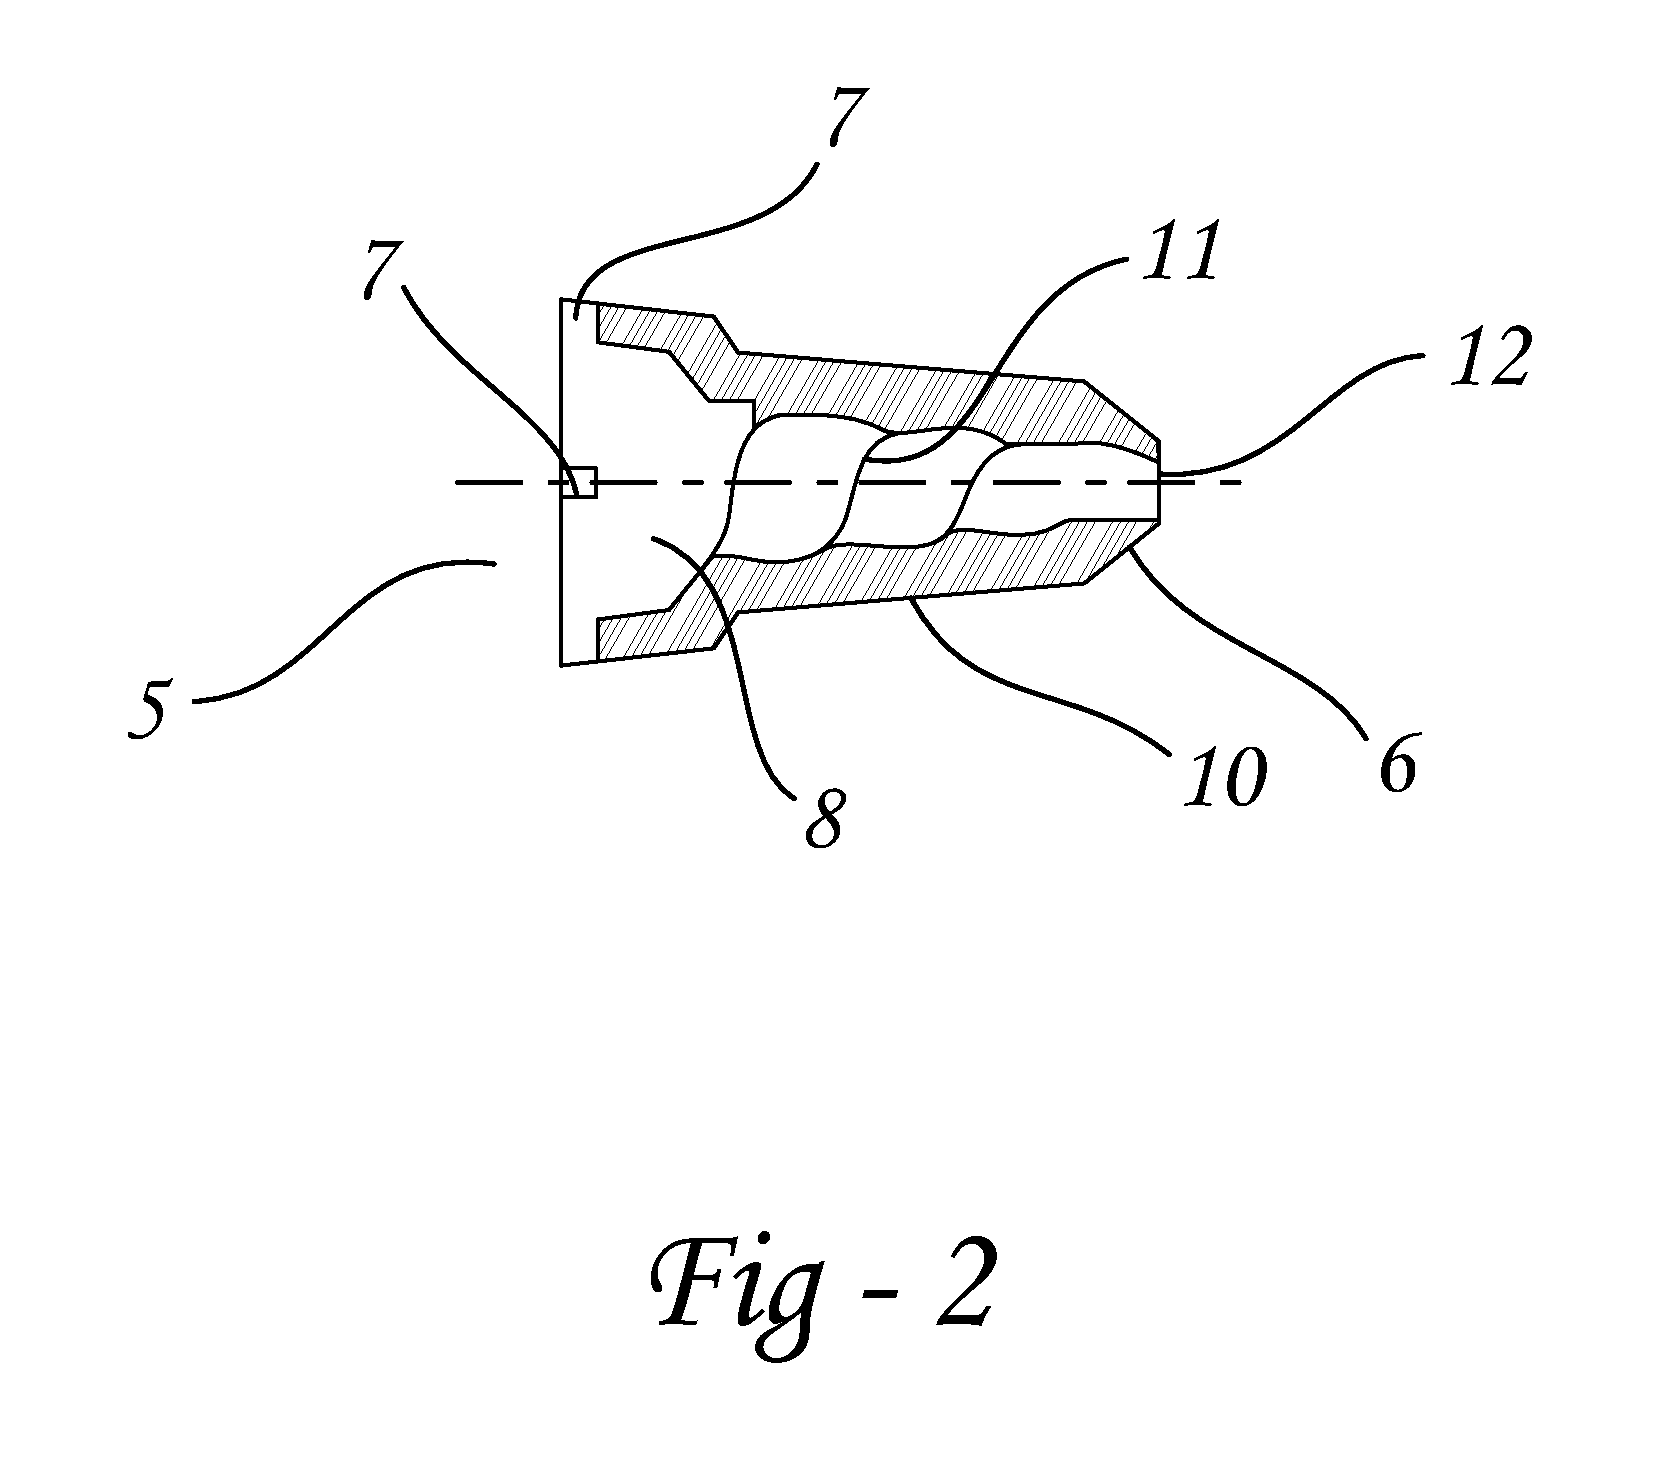 Devices and Methods for Packaging and Dispensing Unit Doses of Personal Care Products